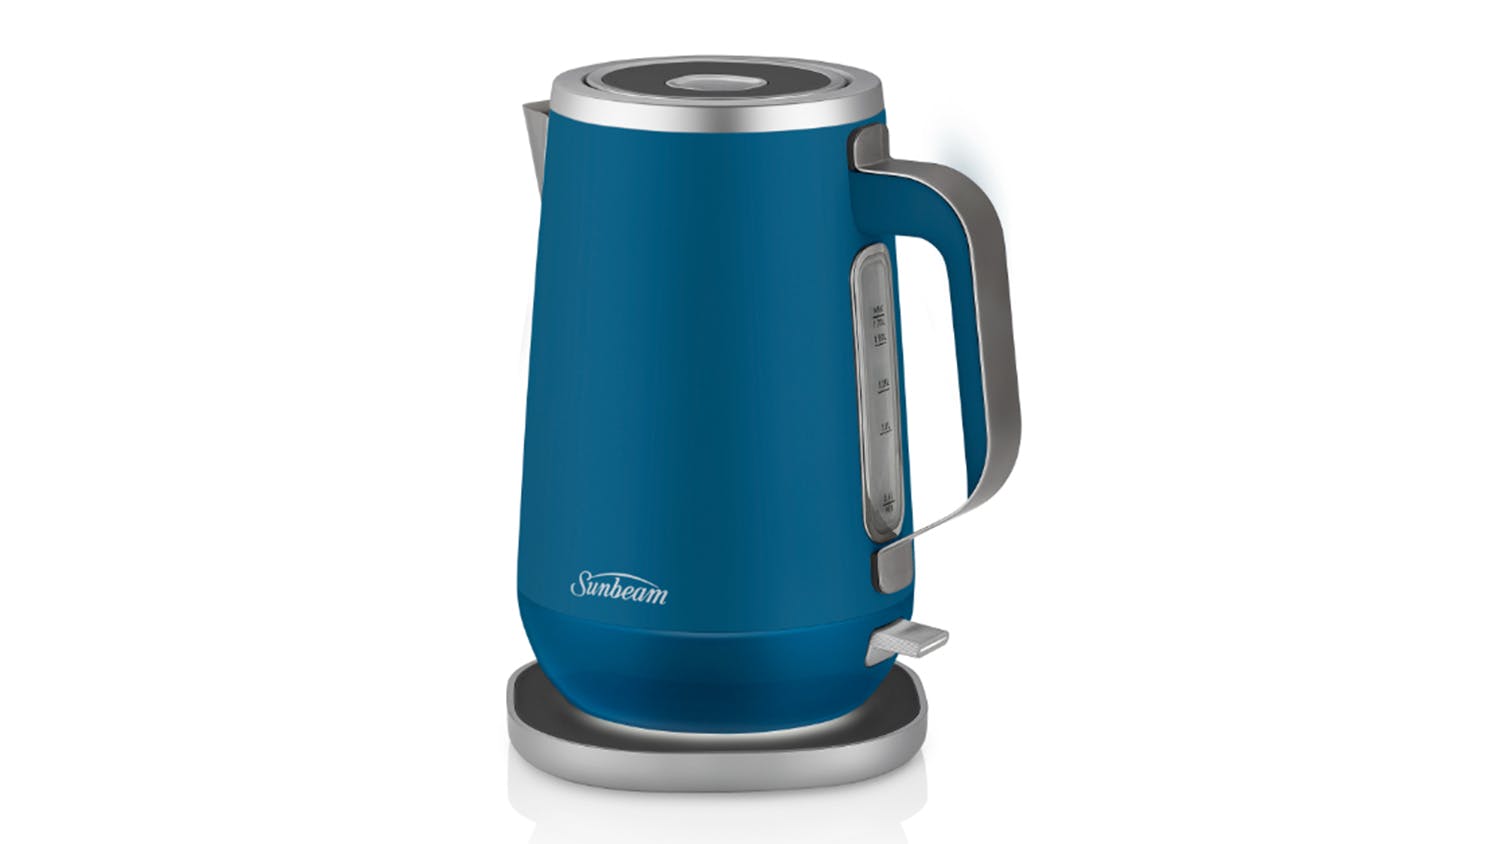 Sunbeam Kyoto City Collection 1.7L Kettle - Blue Coral